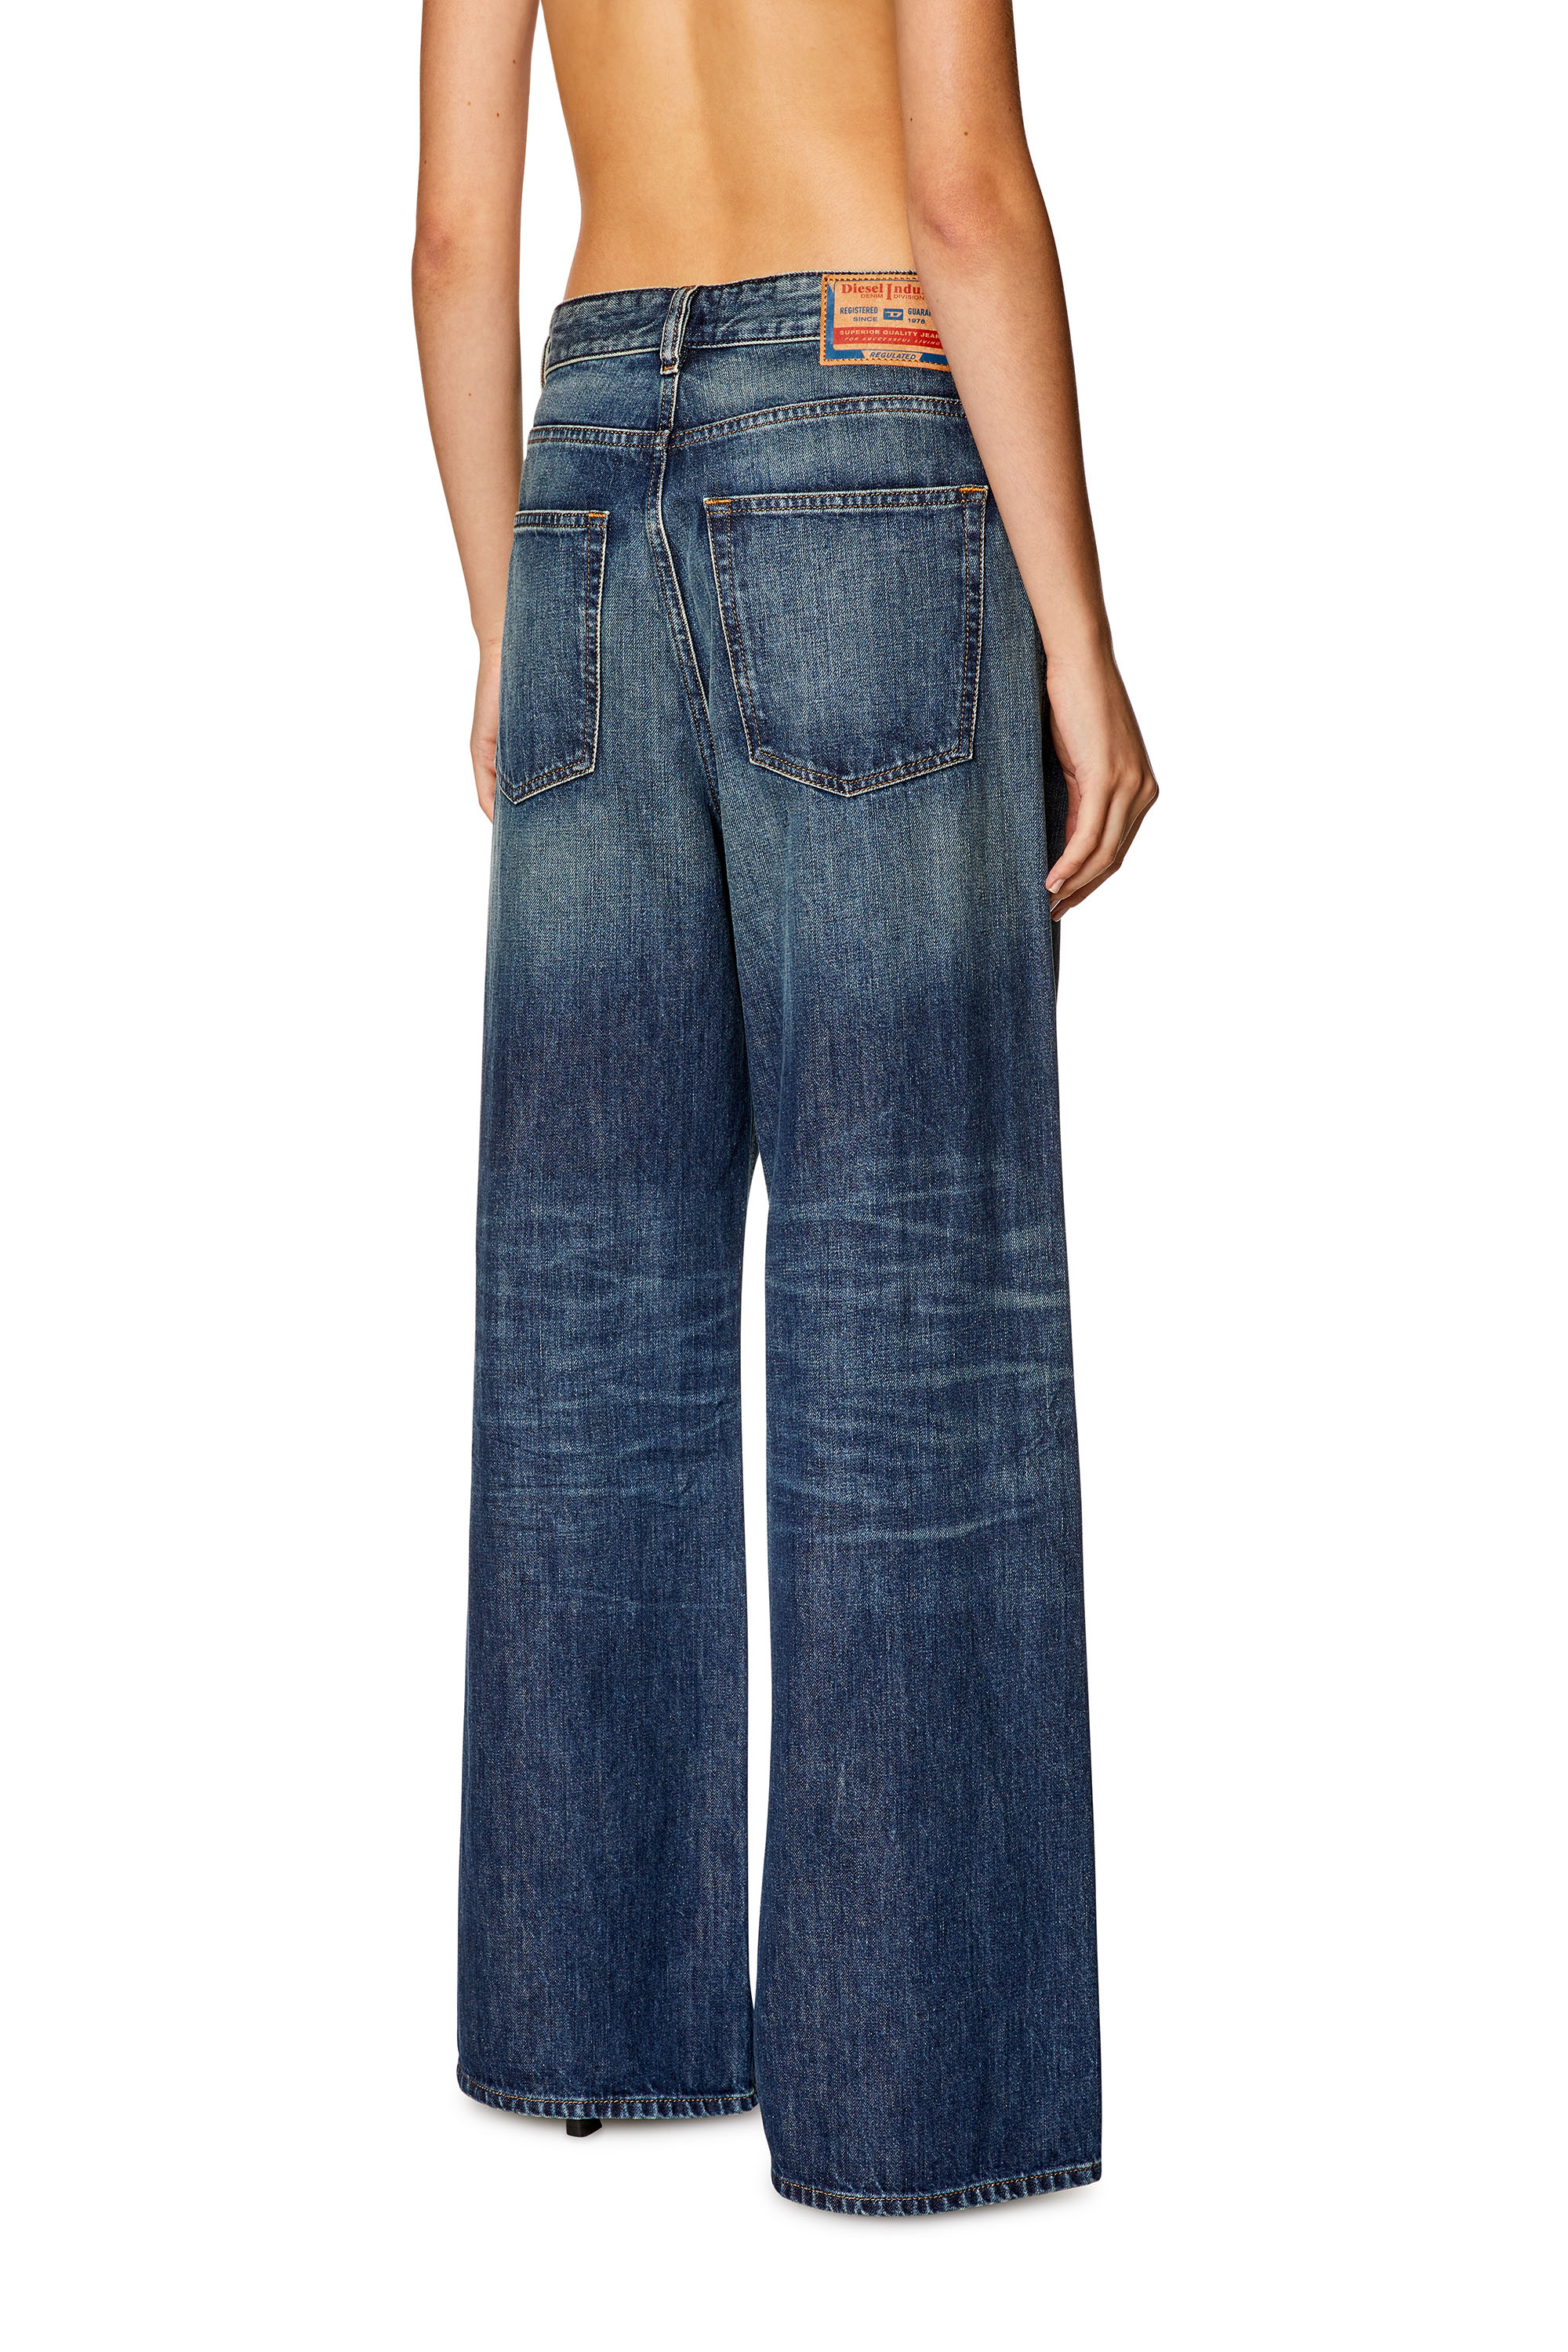 Diesel - Straight Jeans 1996 D-Sire 09H59, Mujer Straight Jeans - 1996 D-Sire in Azul marino - Image 3